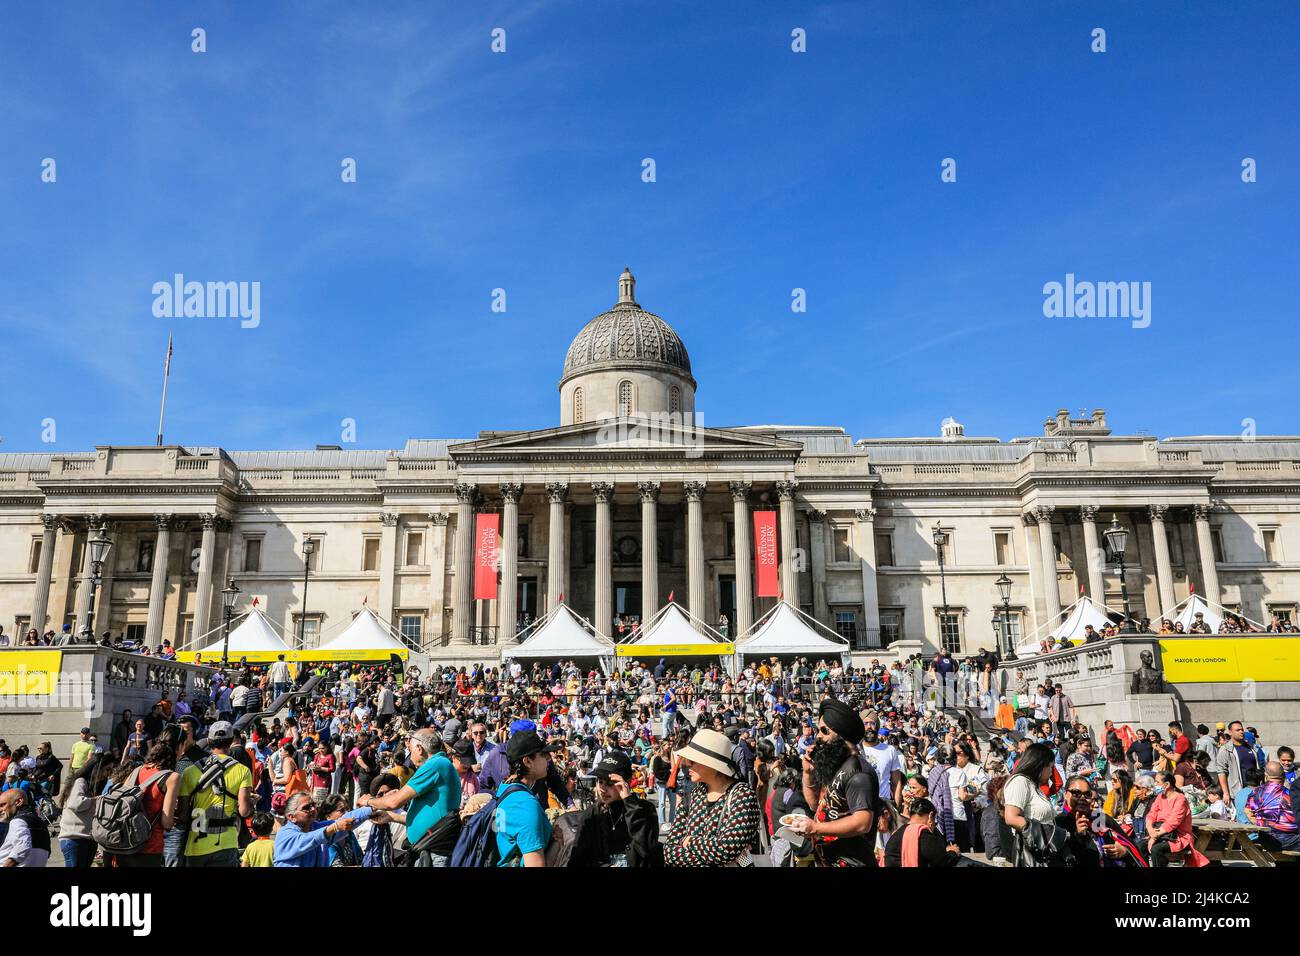 London, UK. 16th Apr, 2022. Vaisakhi Festival, a celebration of Sikh and Punjabi tradition and culture is once again back at Trafalgar Square. Highlights include the martial arts (Gatka), colourful stage performances of kirtan and dharmic music, as well as food and cooking demonstrations. Credit: Imageplotter/Alamy Live News Stock Photo